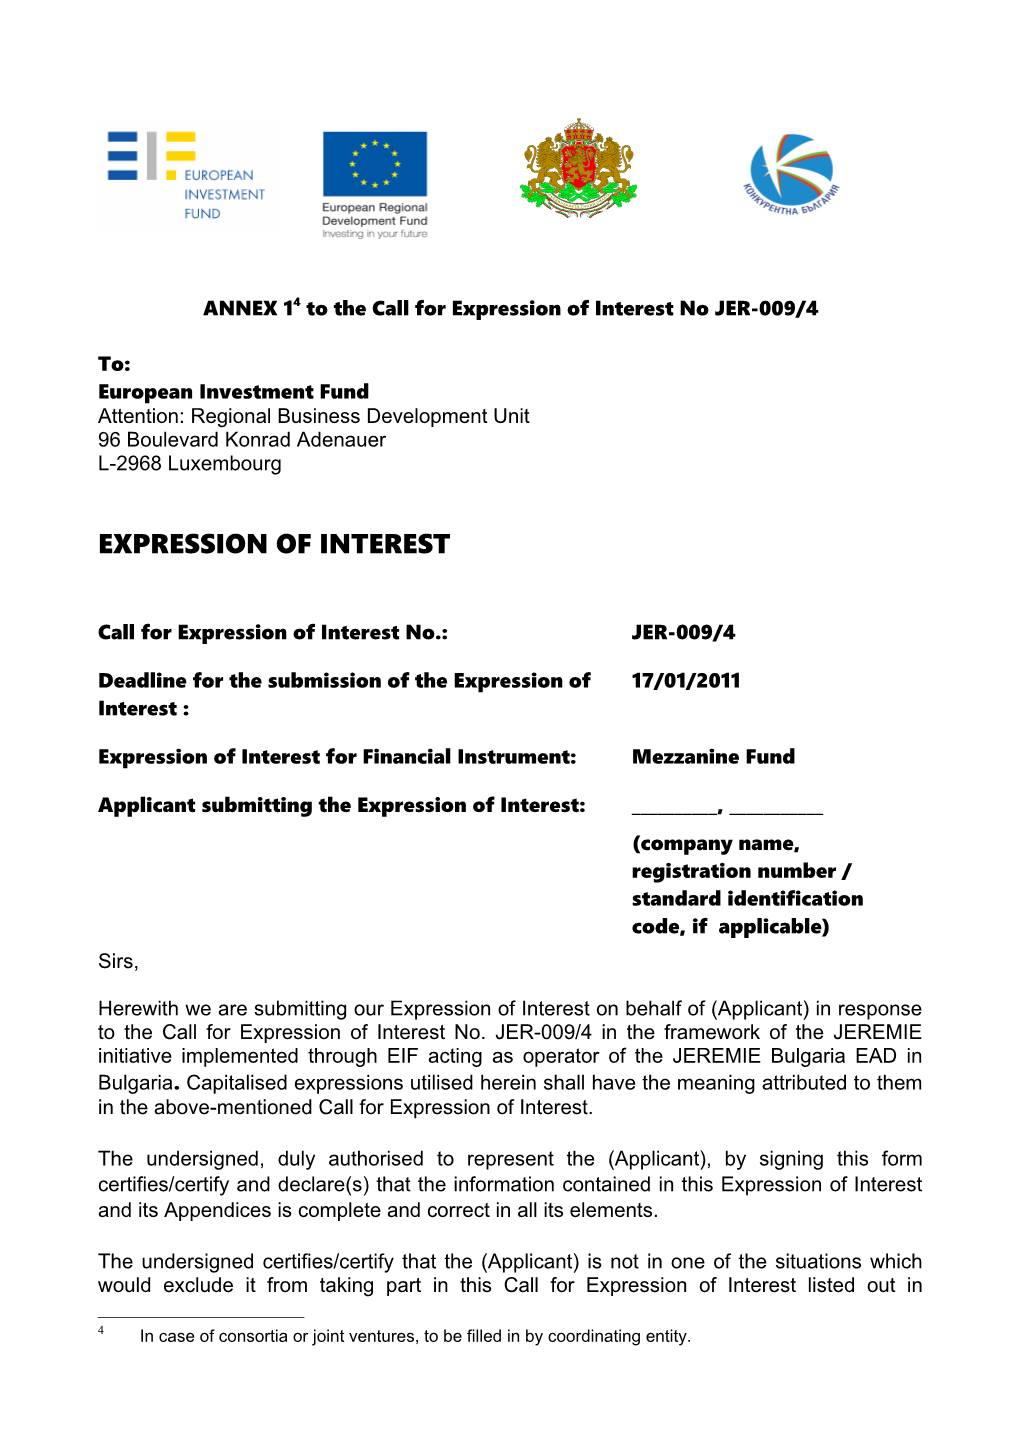 ANNEX 1 4 to the Call for Expression of Interest No JER-009/4